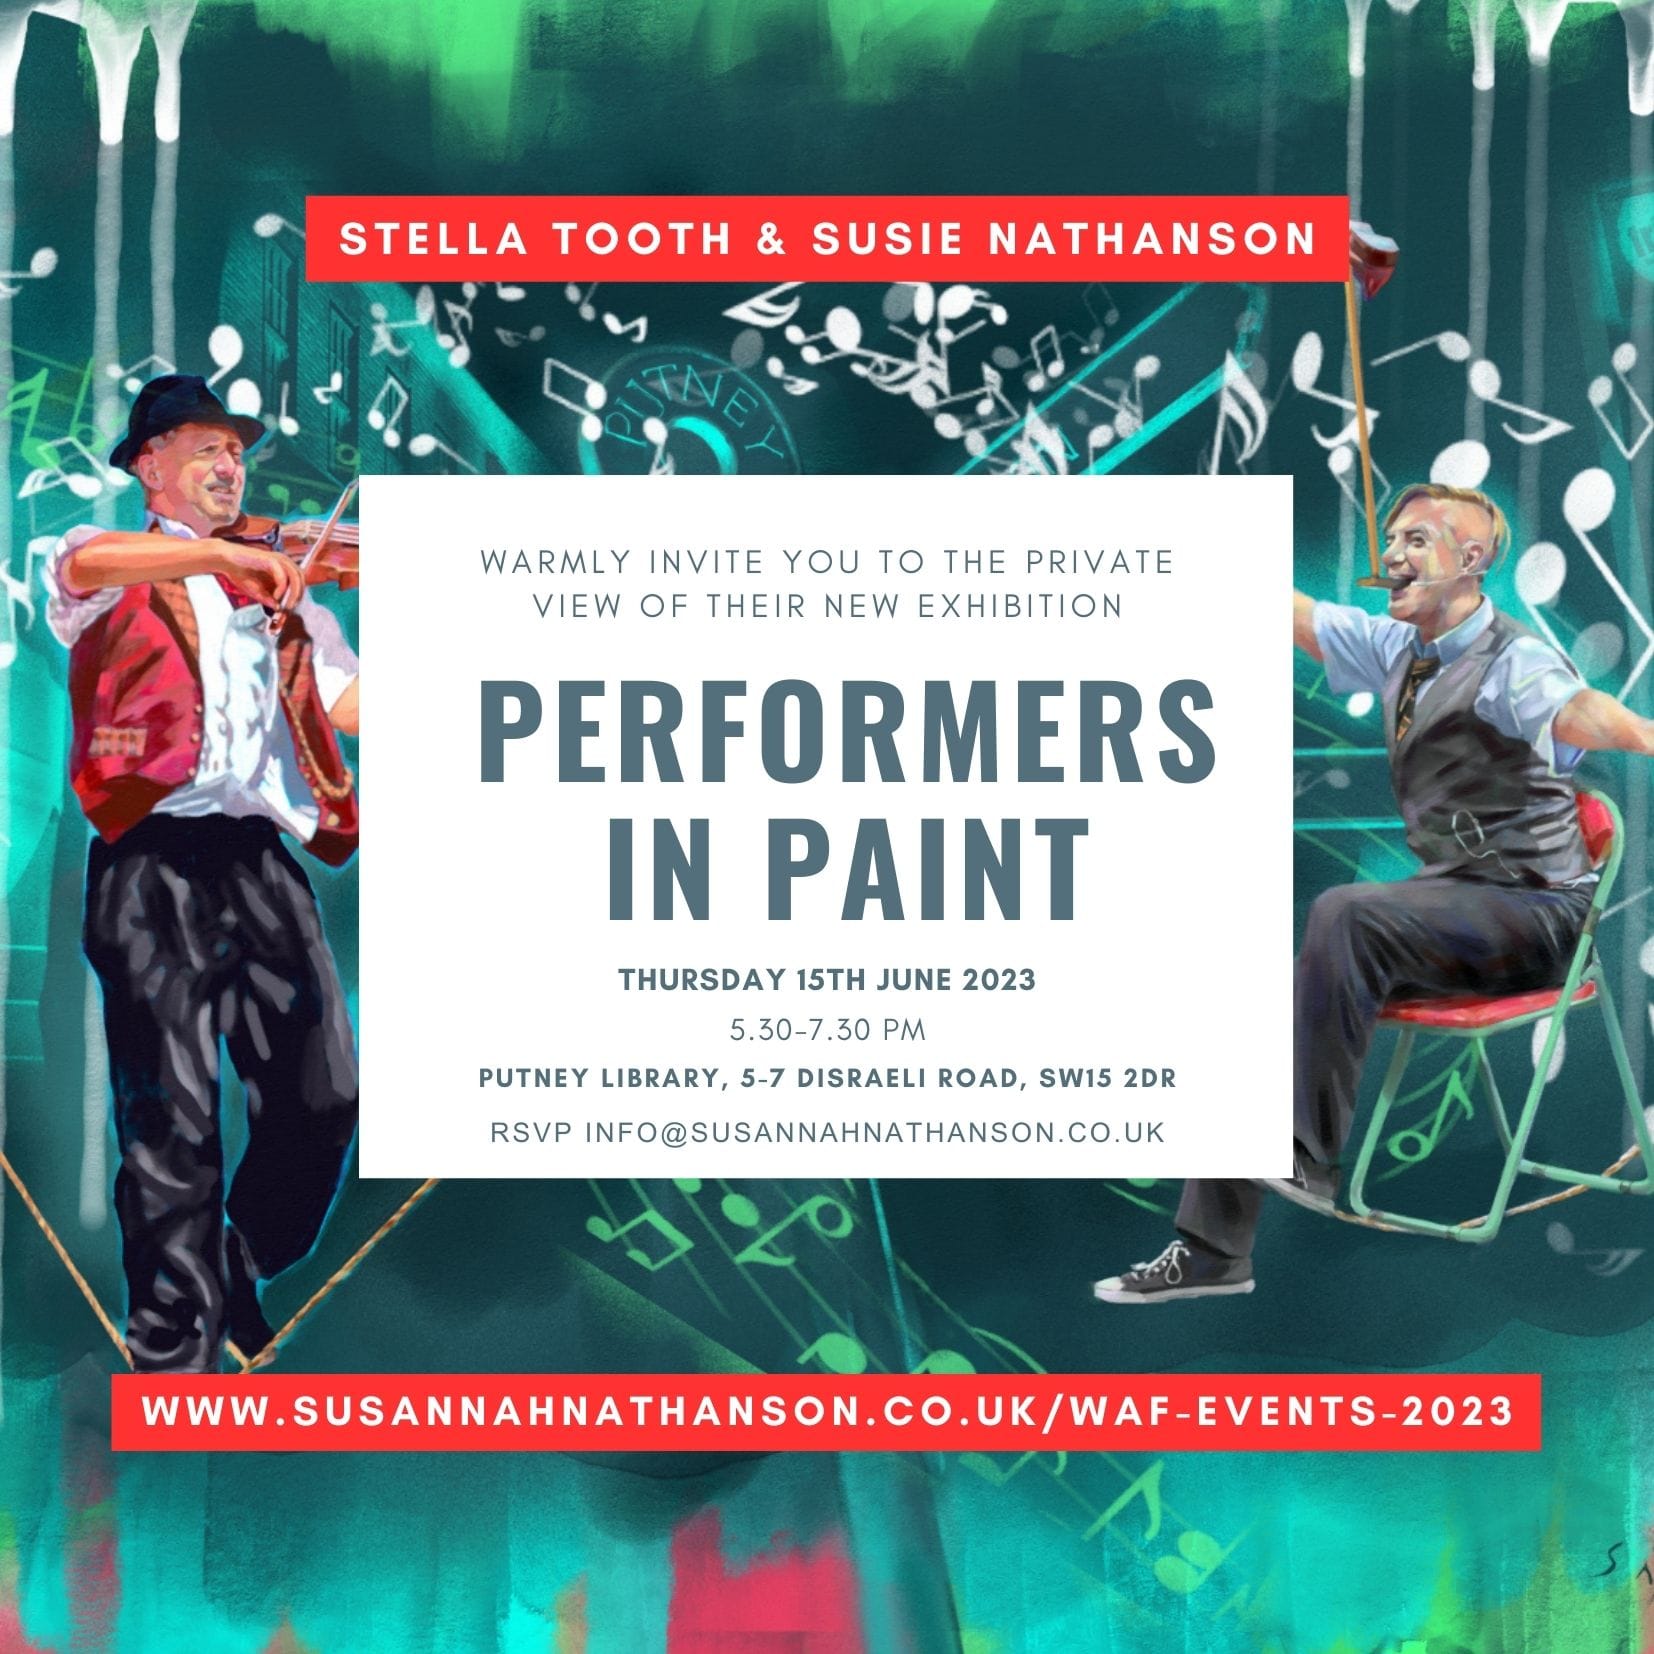 Private View invitation to Performers in Paint exhibition June 2023 Putney